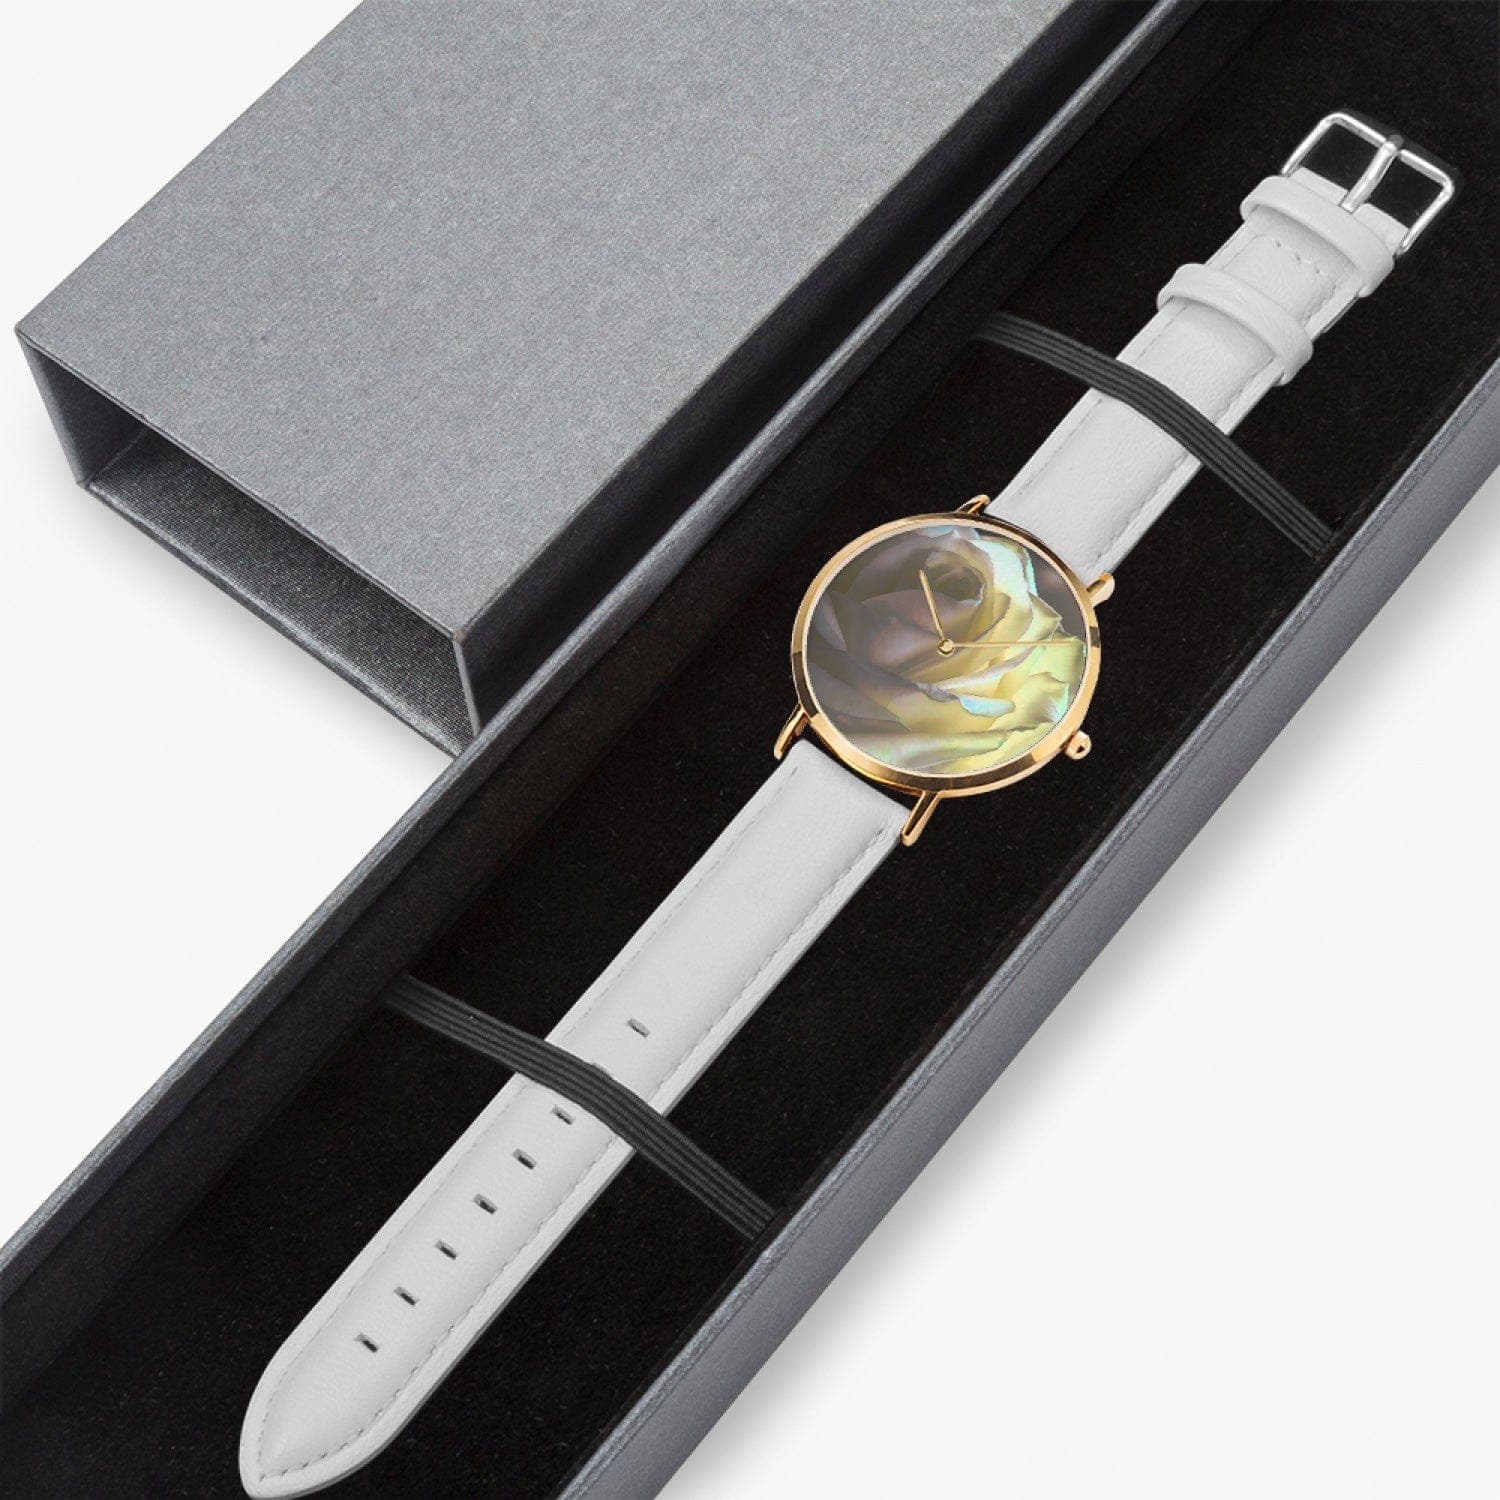 Shy white rose. Hot Selling Ultra-Thin Leather Strap Quartz Watch (Rose Gold) designed by Sensus Studio